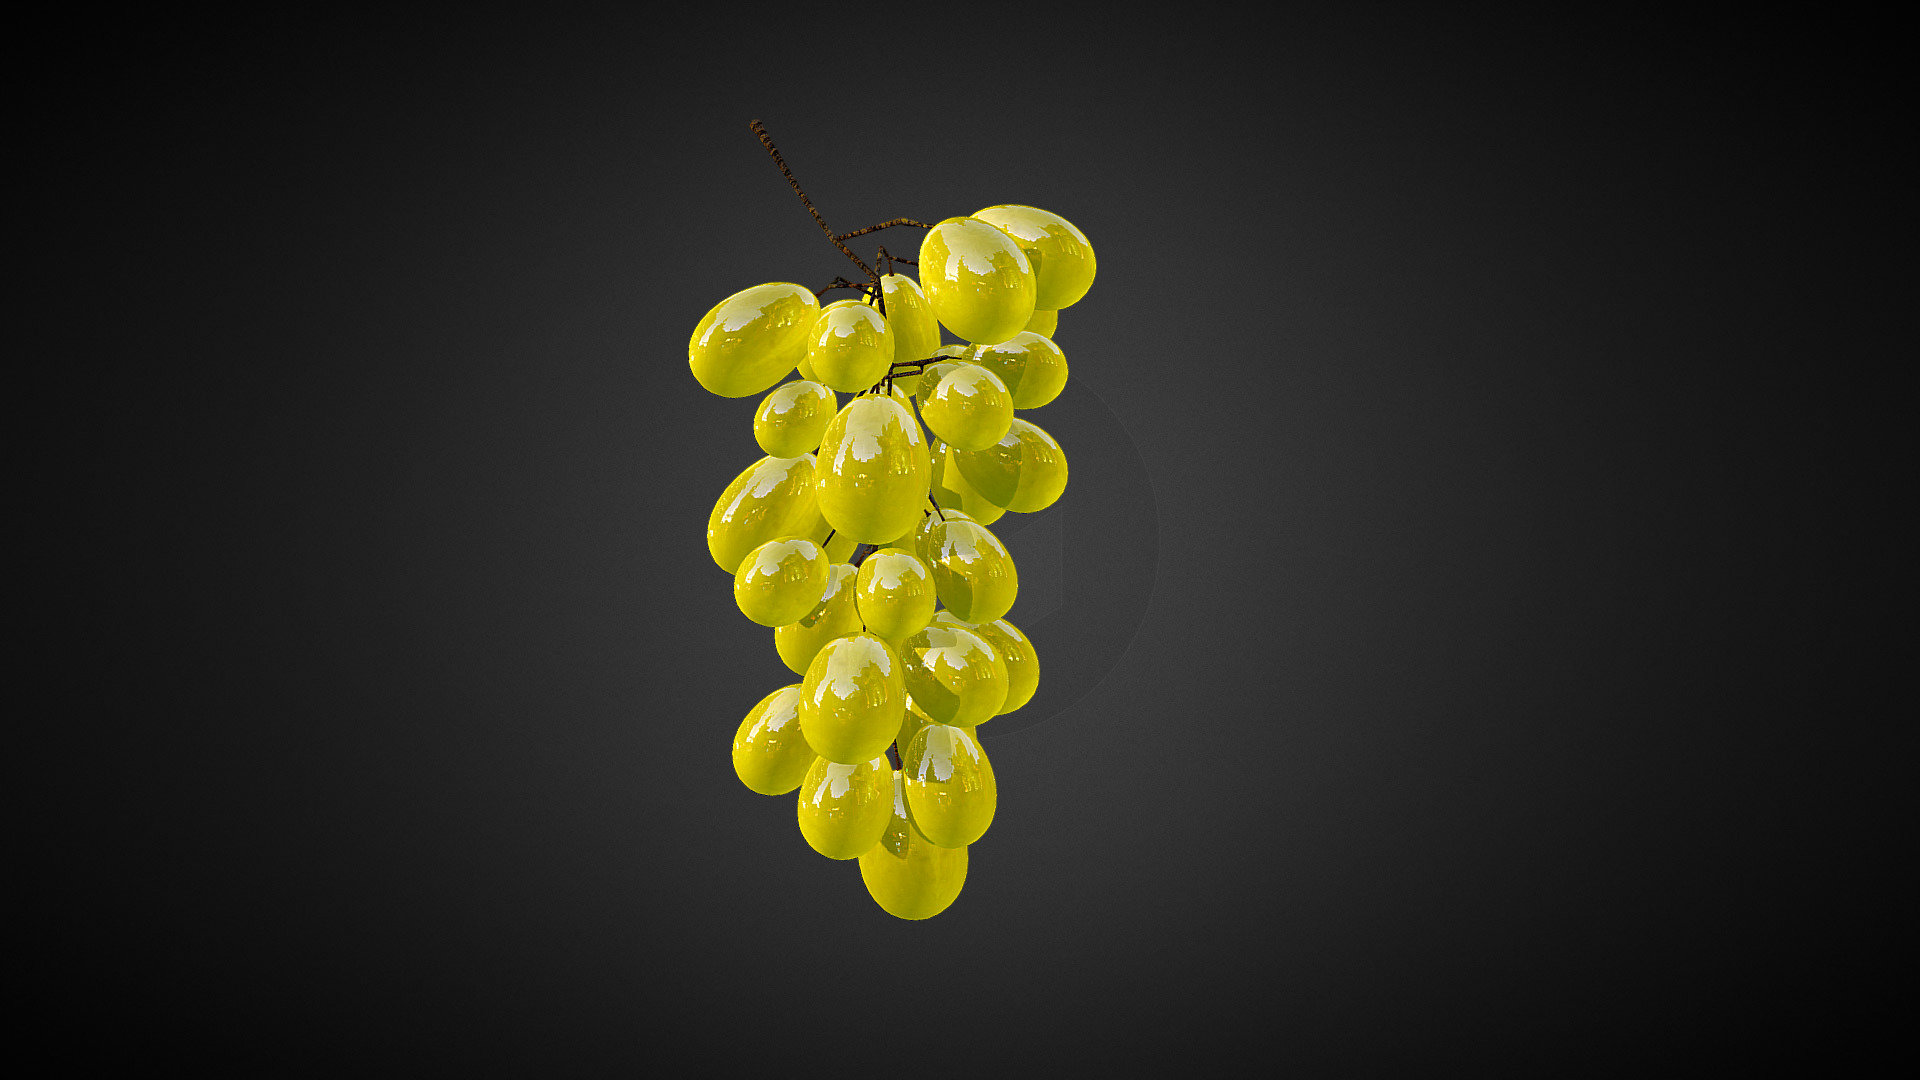 3ds max model,ready for game and virtual reality - Grape - Buy Royalty Free 3D model by pinotoon 3d model